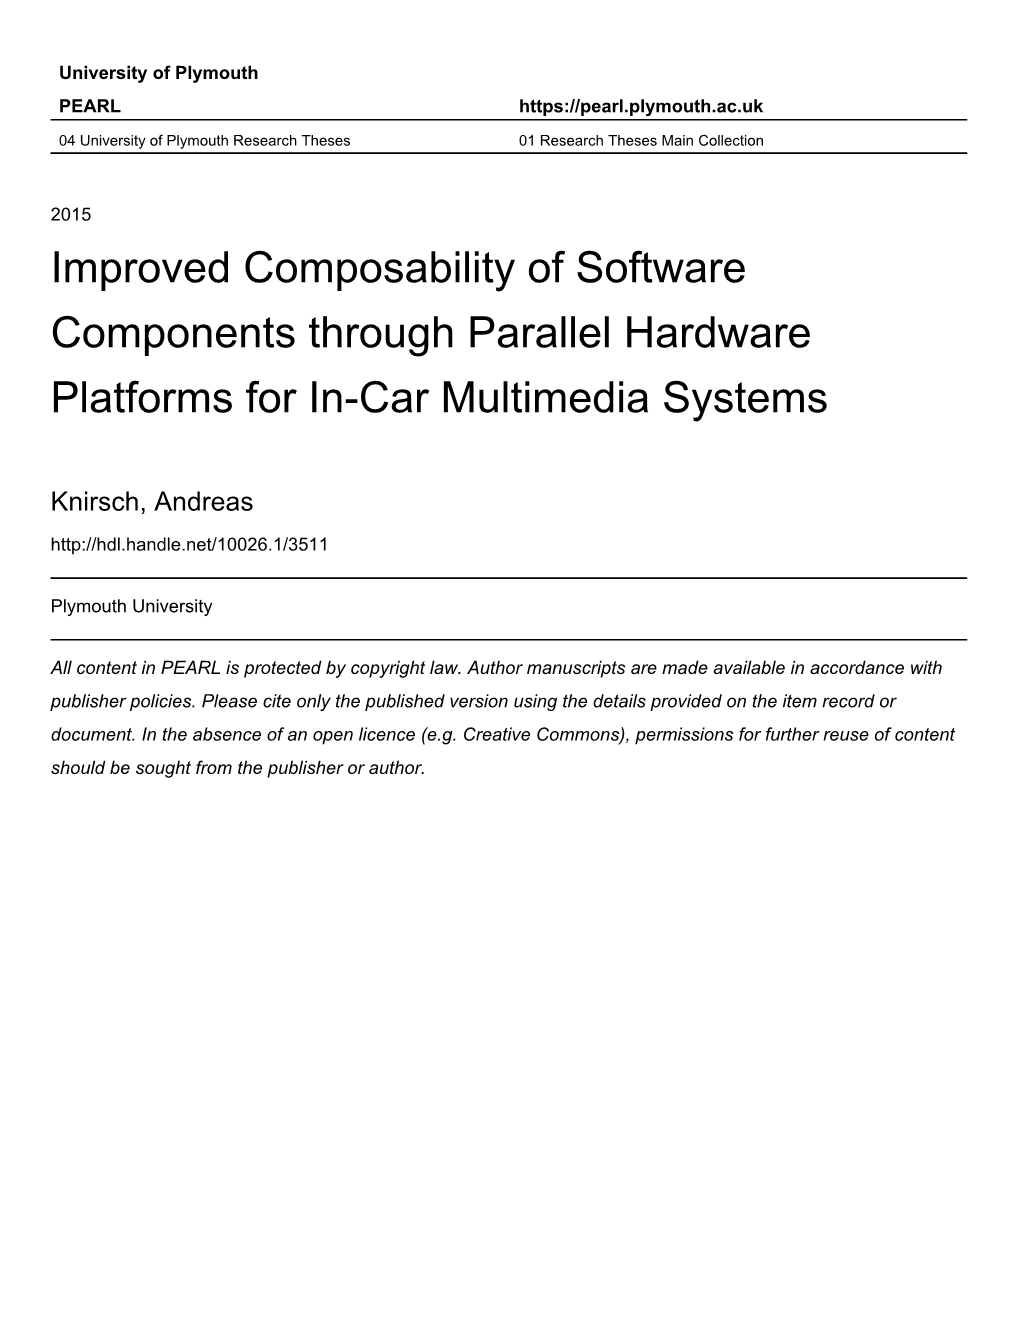 Improved Composability of Software Components Through Parallel Hardware Platforms for In-Car Multimedia Systems